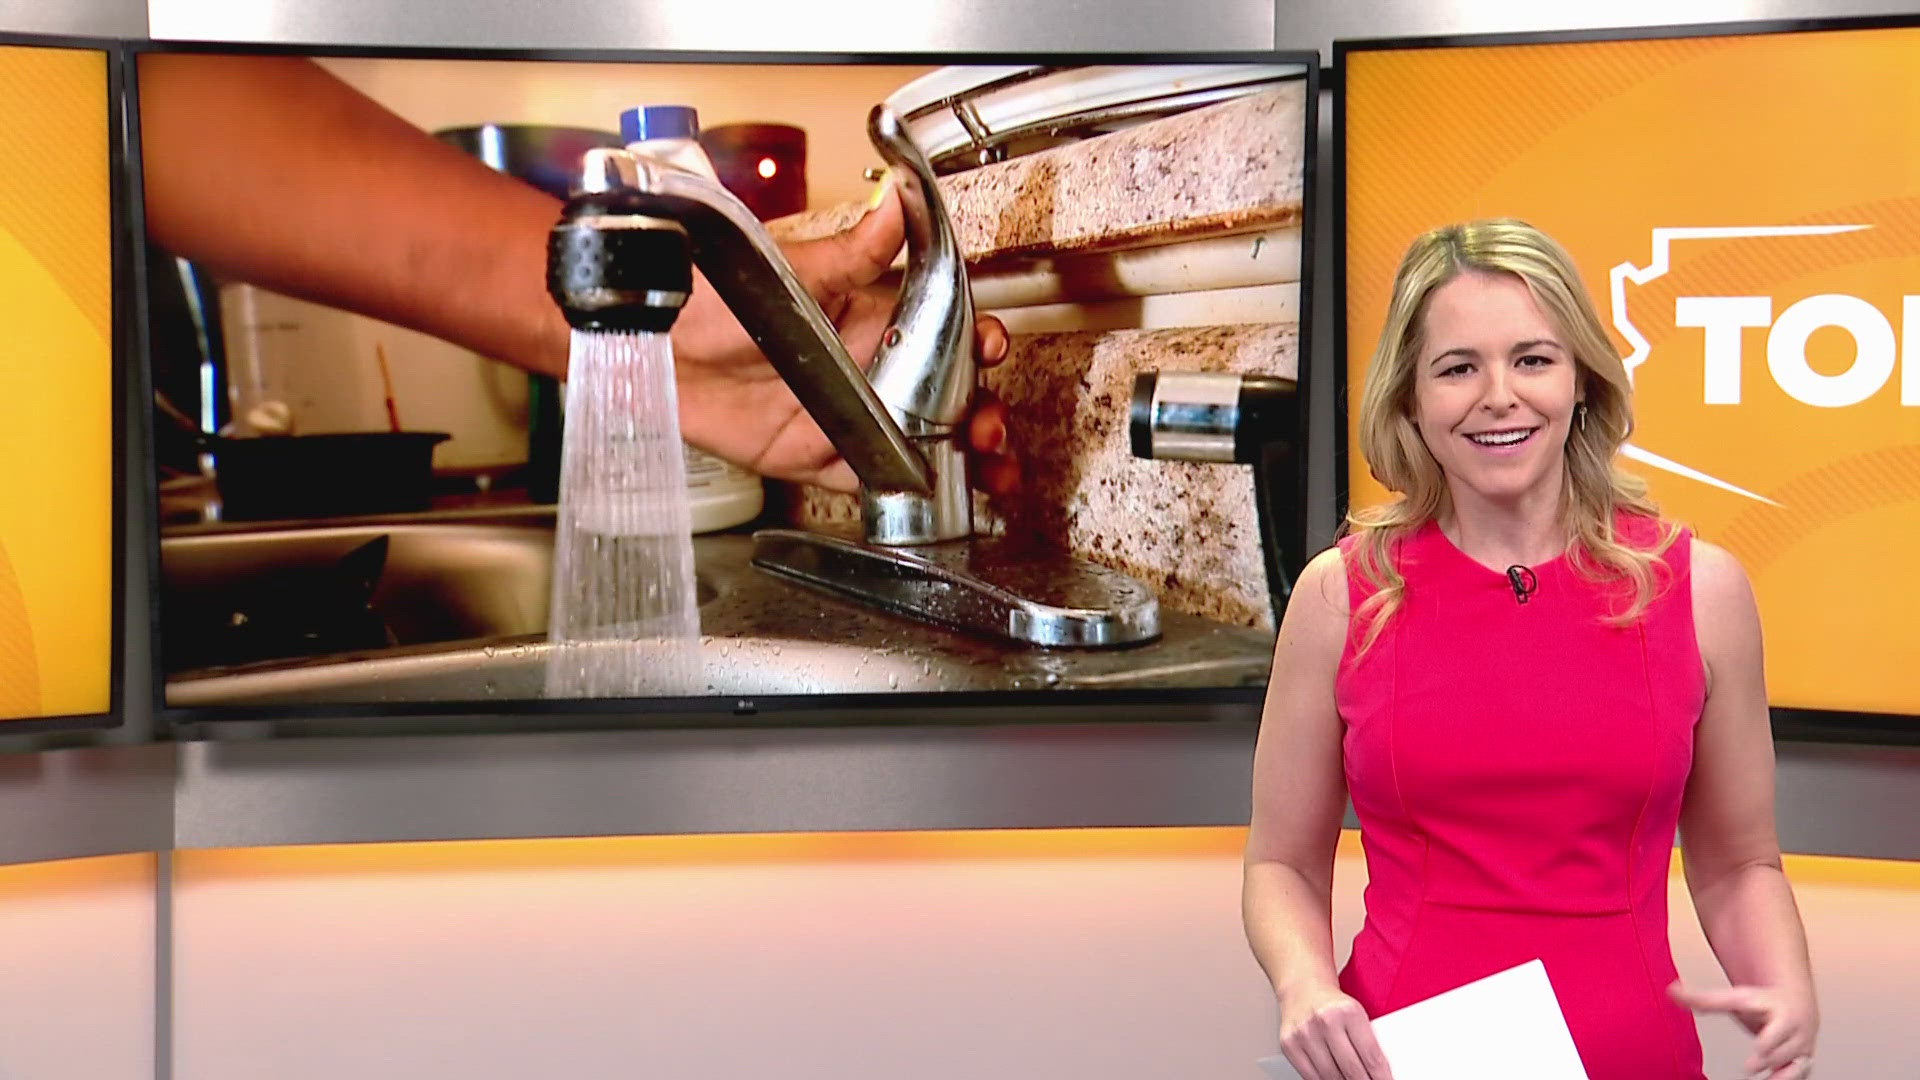 There are plenty of ways you can make your plumbing more eco-friendly. Lauren Rainson has the details.